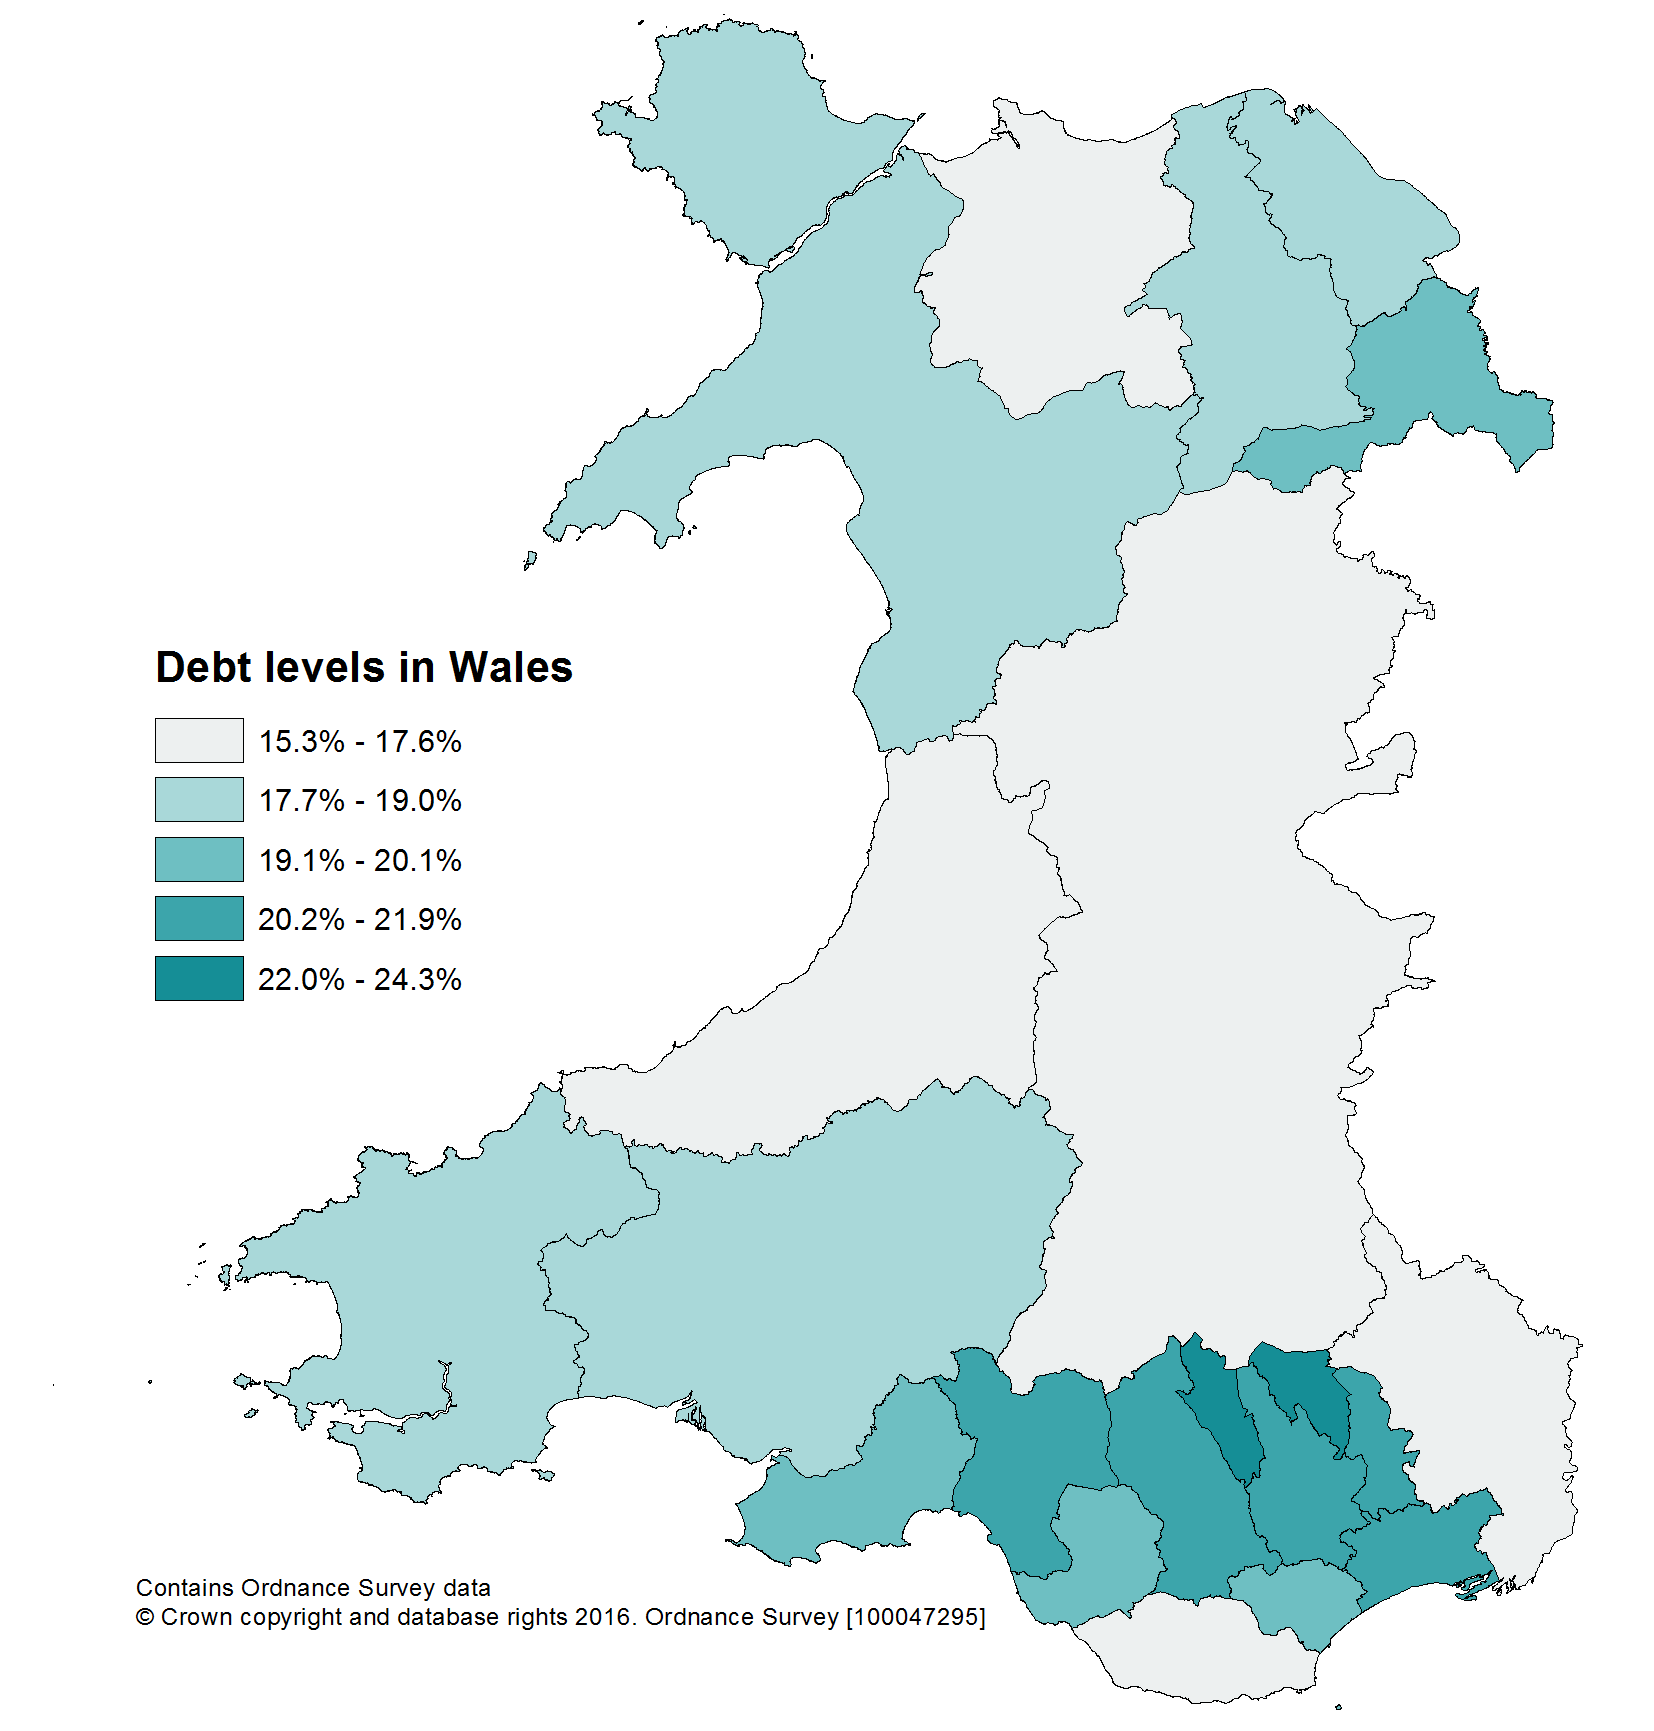 Map showing debt levels in Wales.